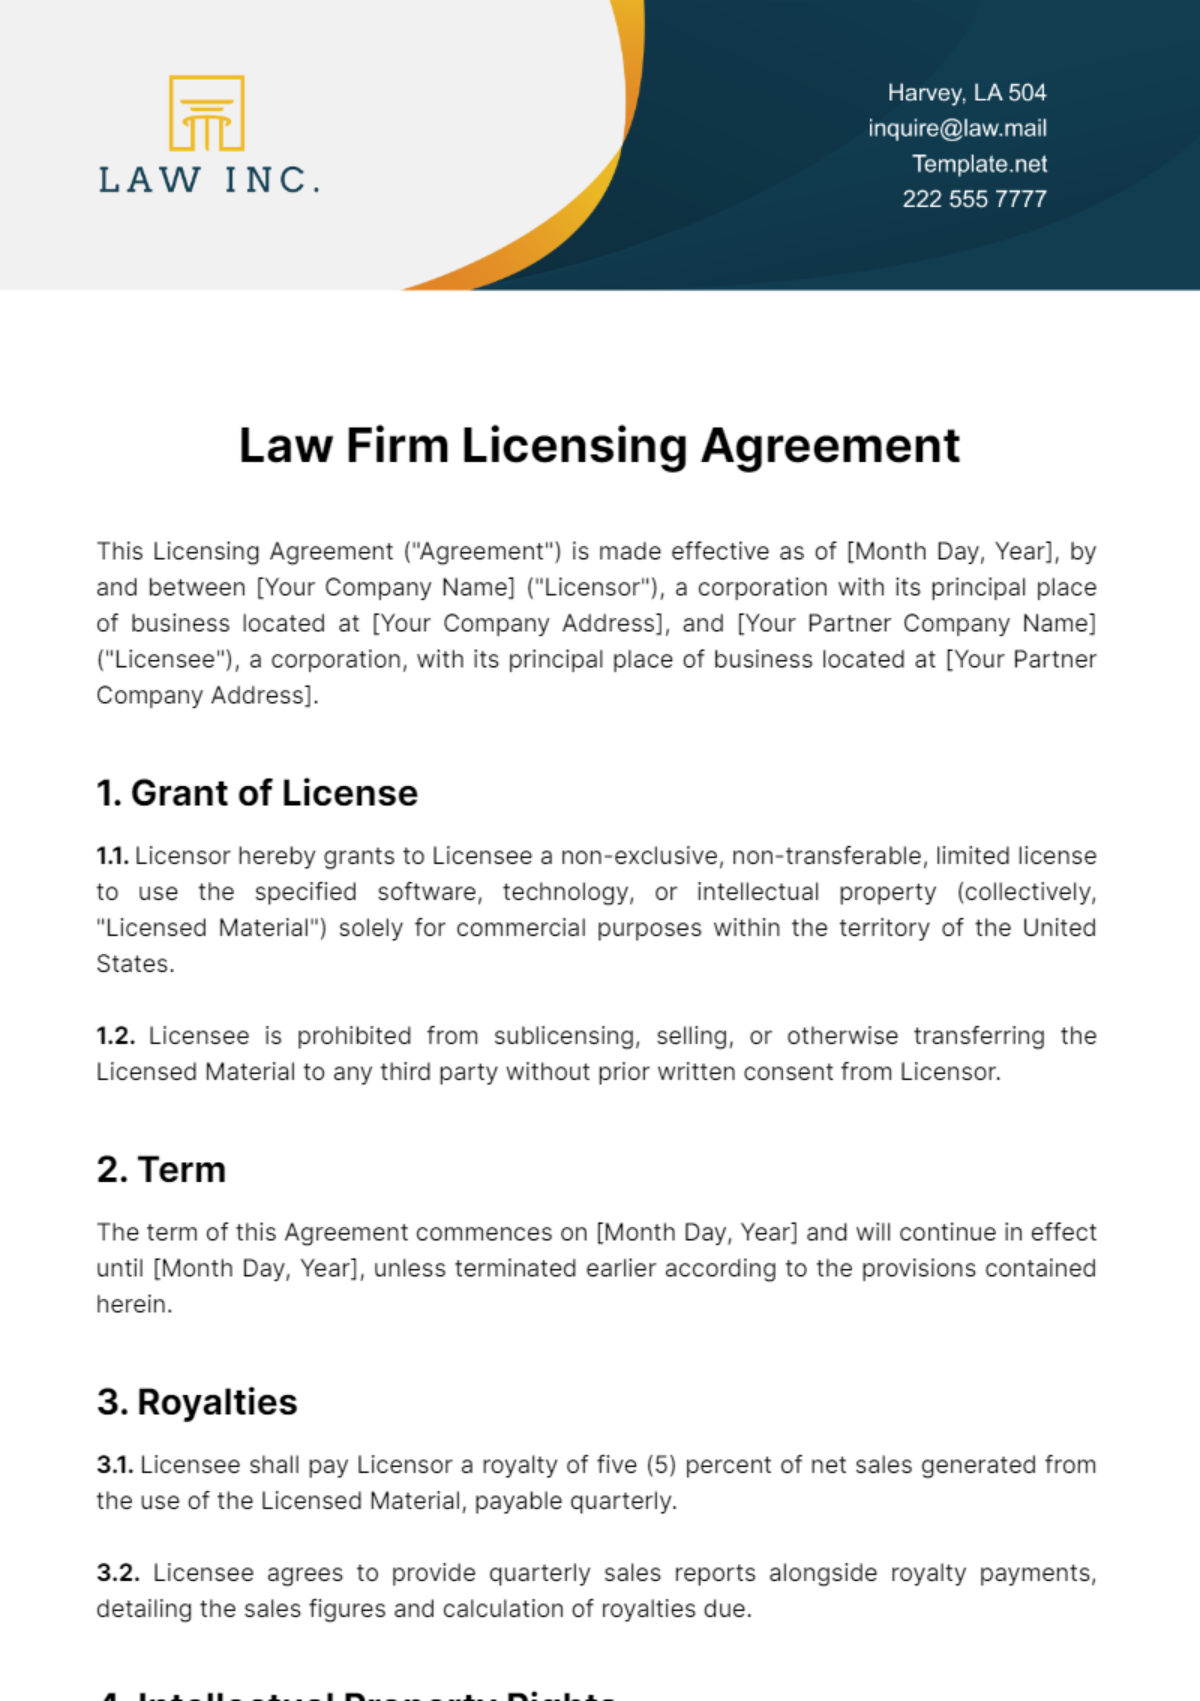 Law Firm Licensing Agreement Template